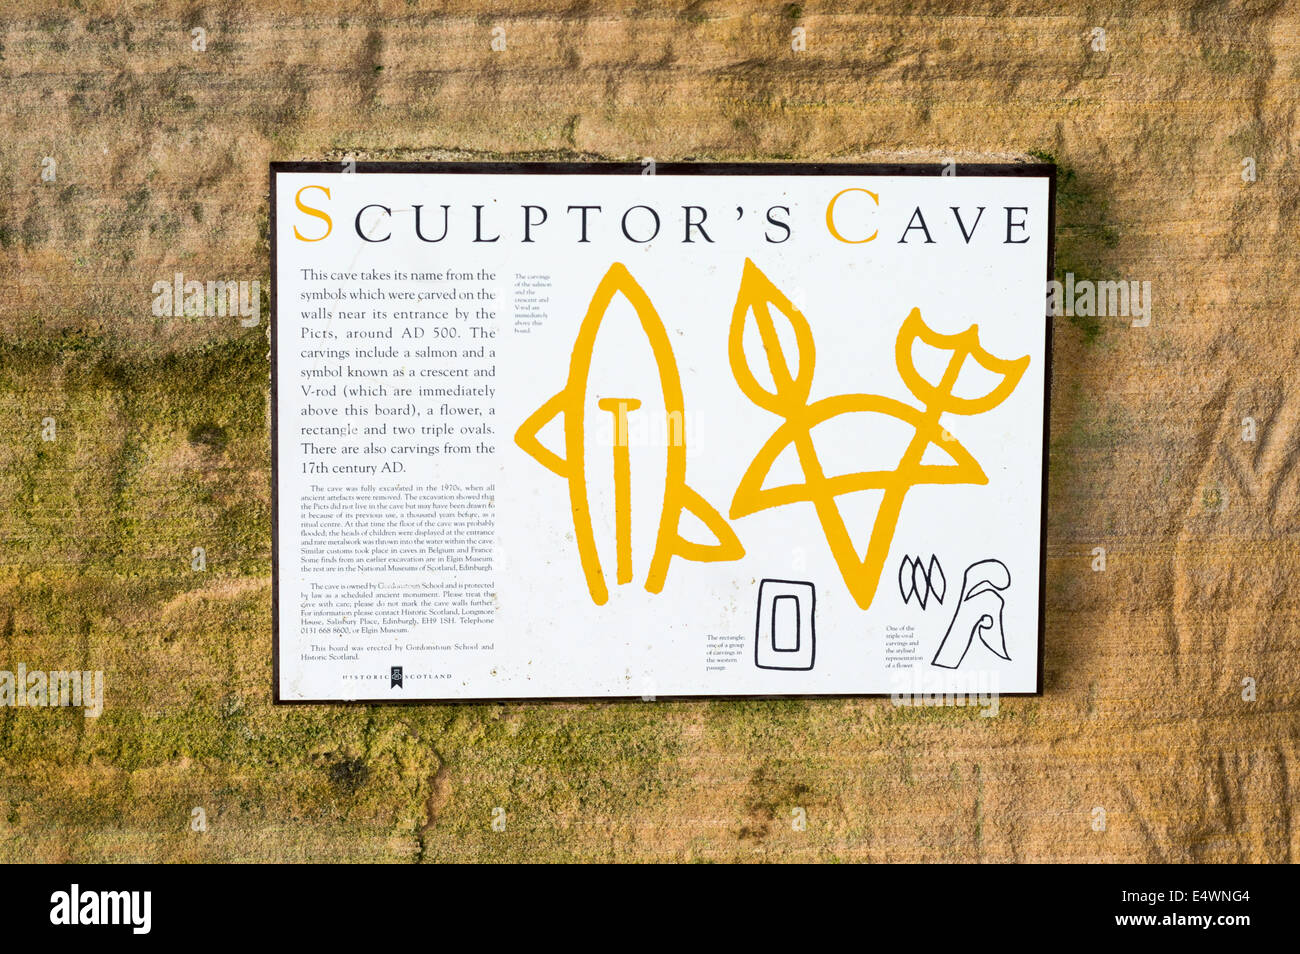 EXPLANATORY SIGN IN SCULPTORS CAVE NEAR HOPEMAN MORAY COAST SCOTLAND SHOWING THE PICTISH SYMBOLS CARVED INTO THE SANDSTONE WALLS Stock Photo